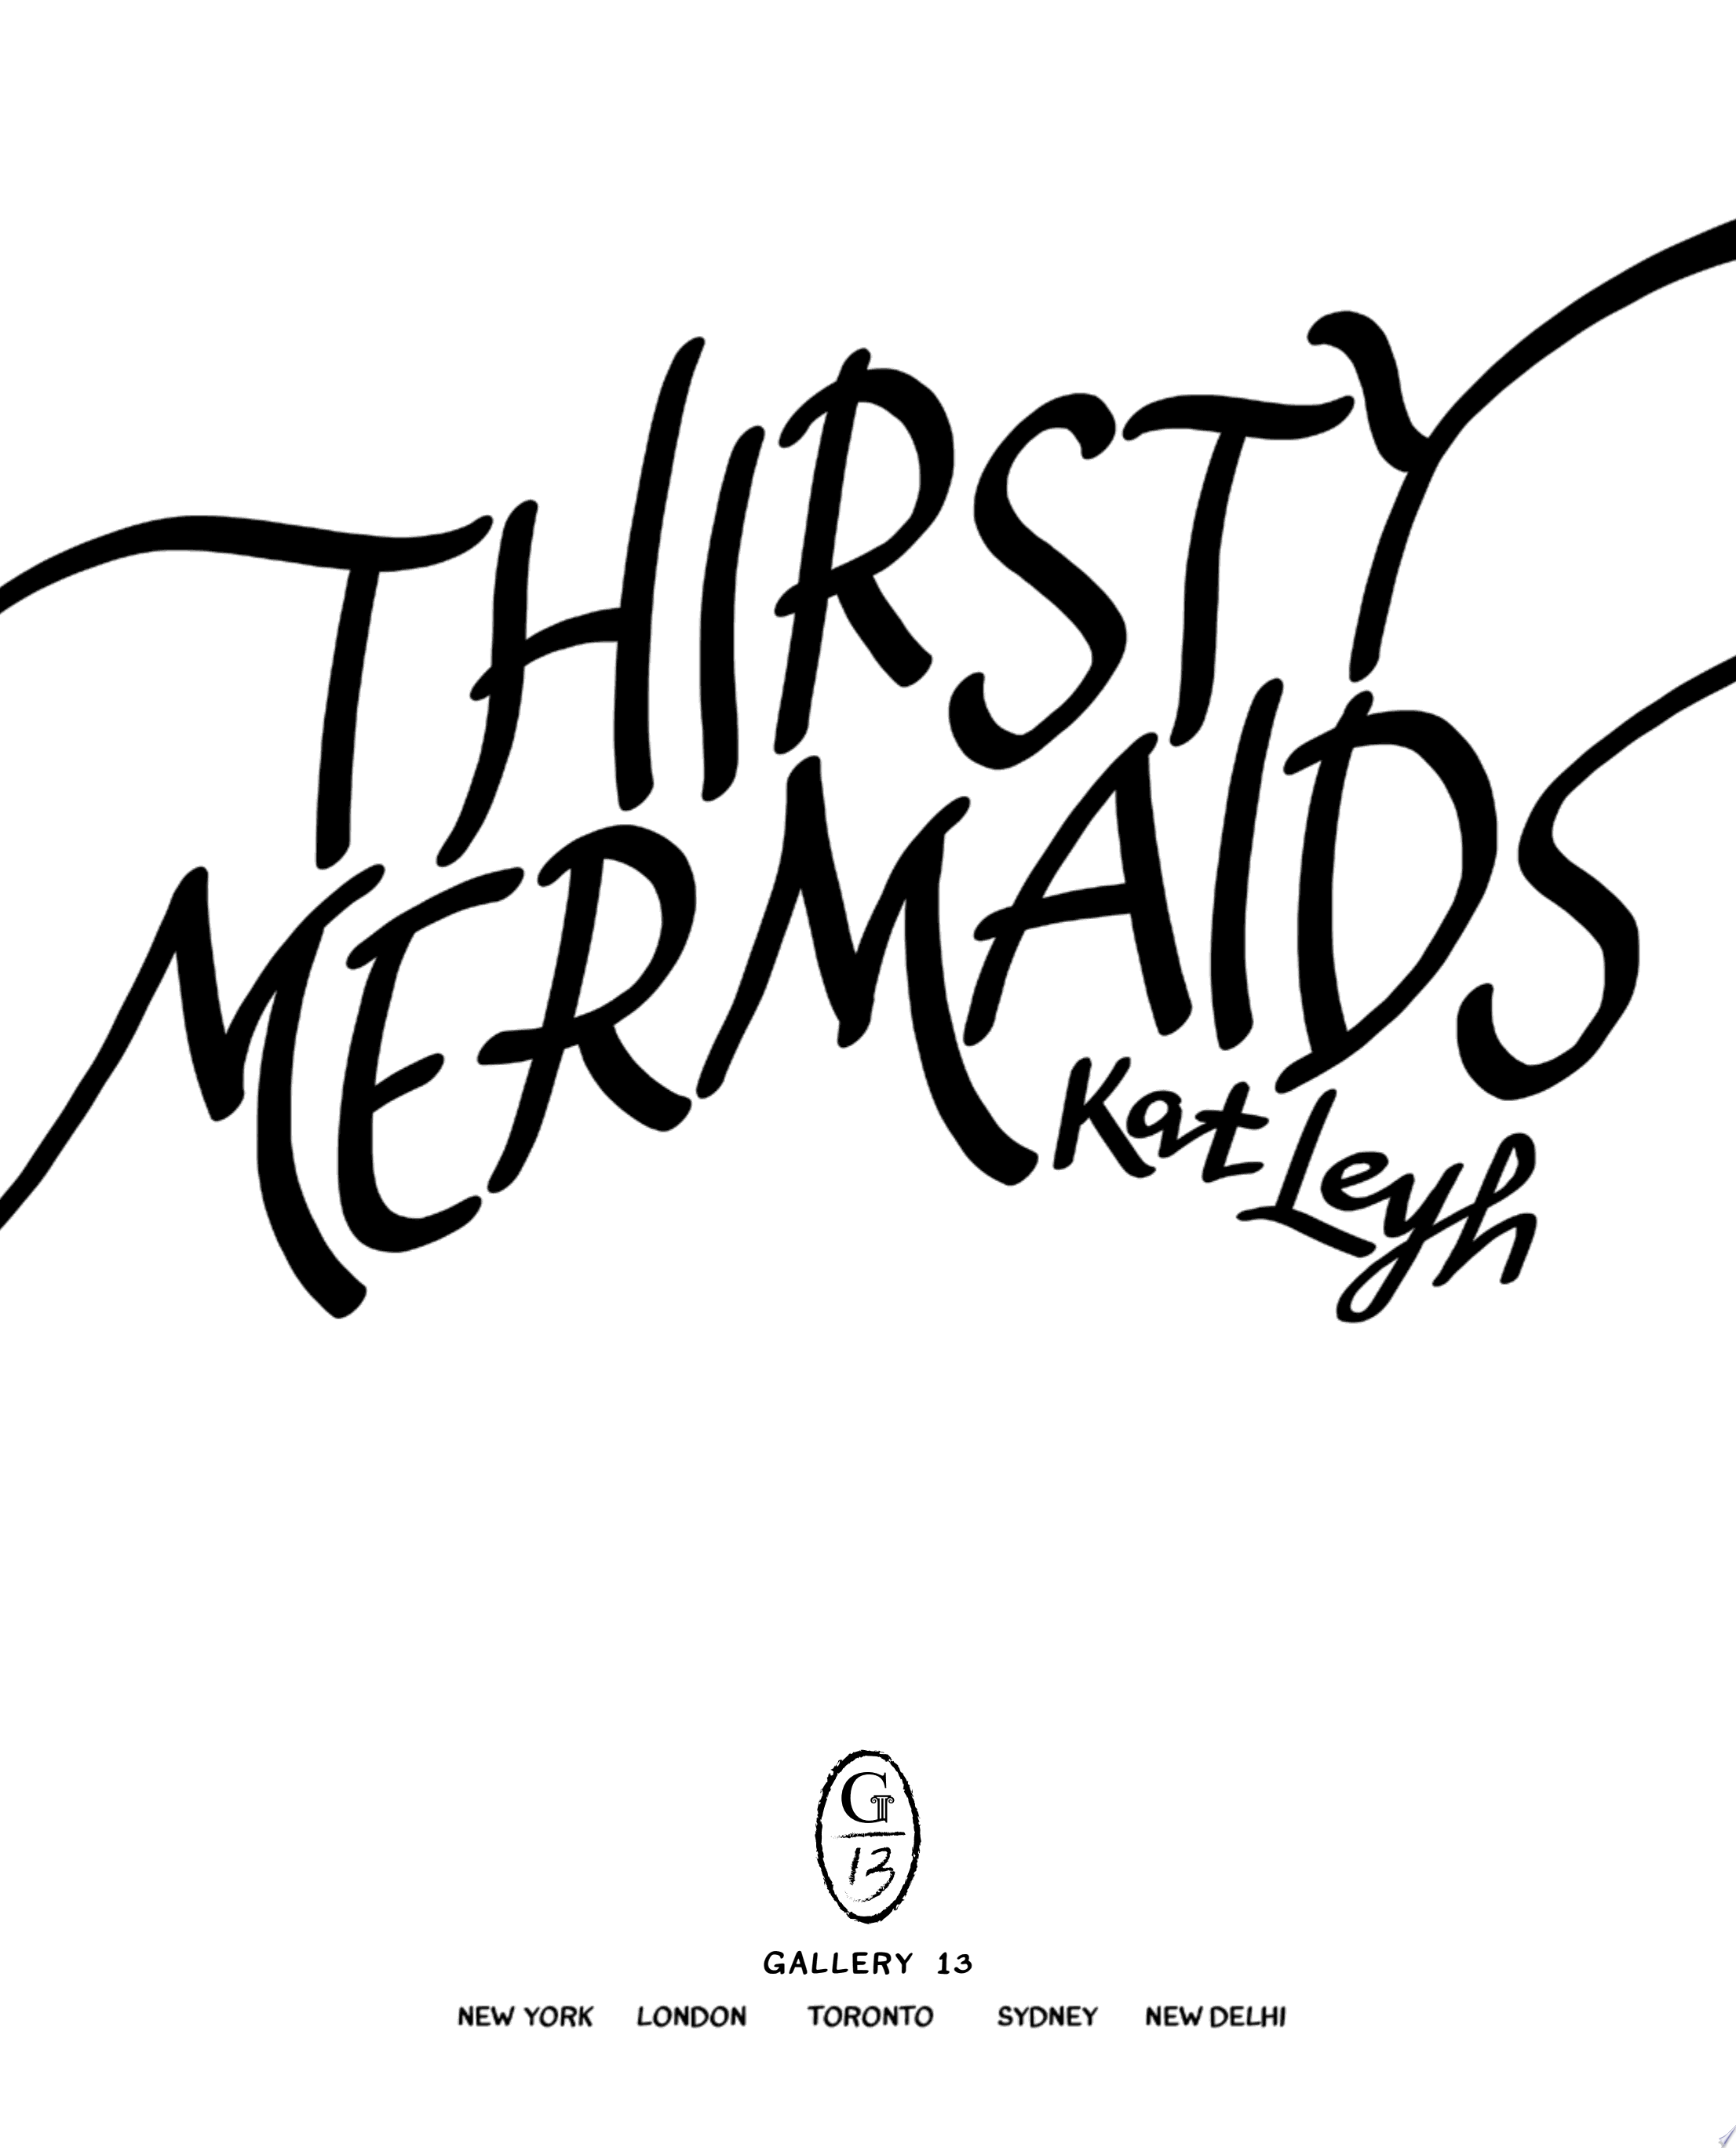 Image for "Thirsty Mermaids"